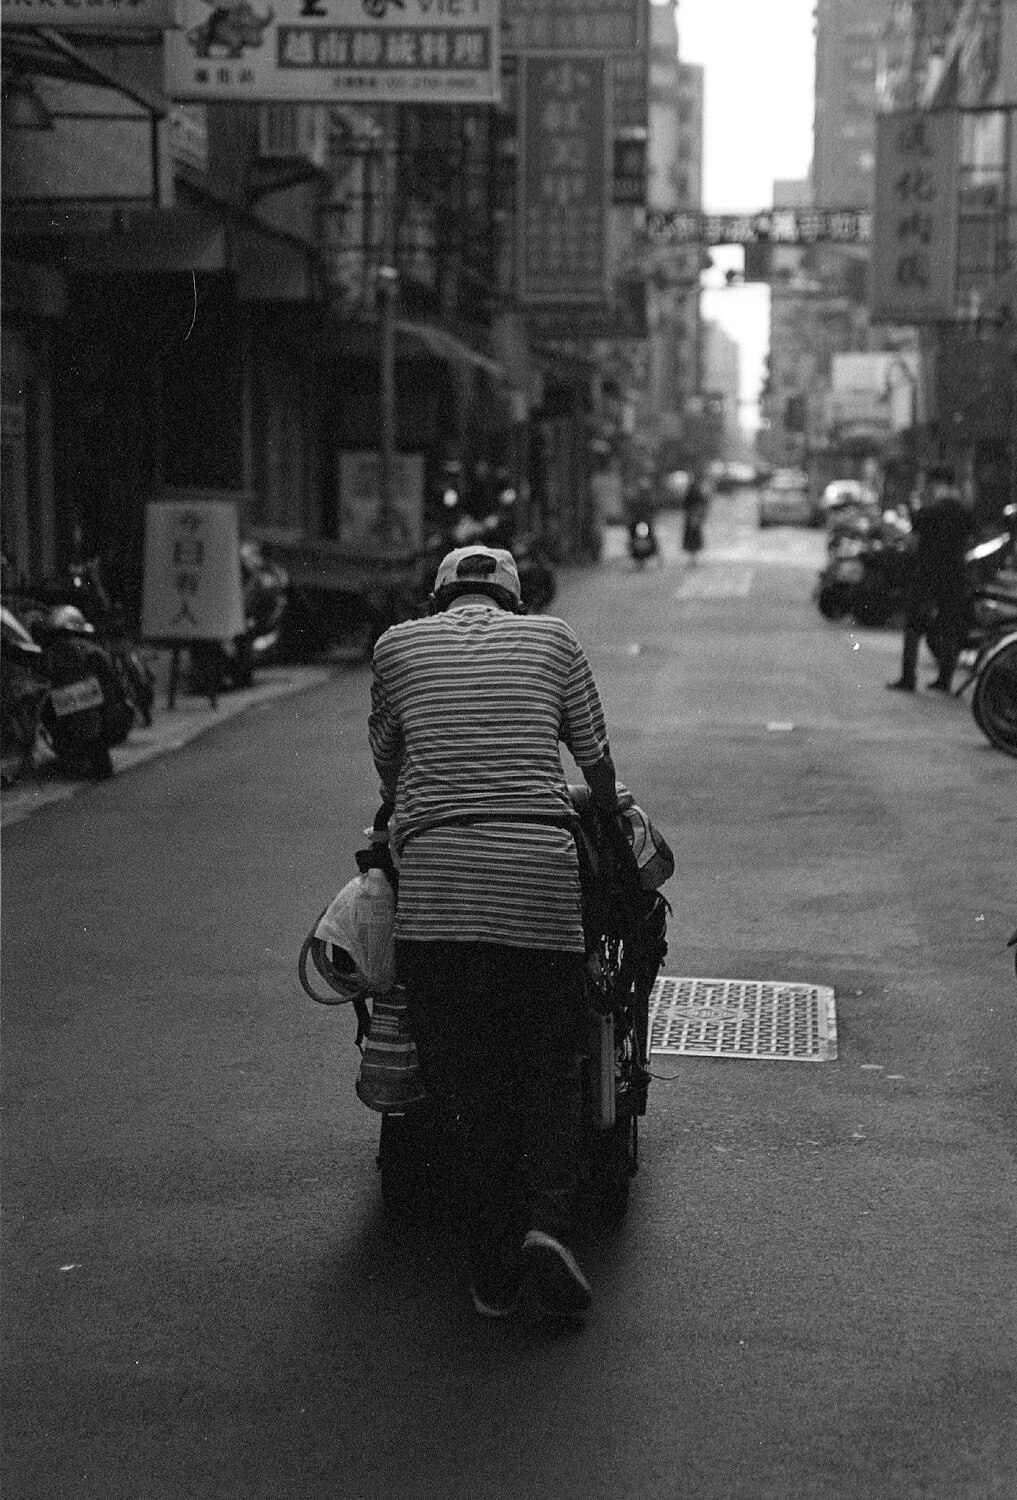 Photography: A delivery in 4 parts… – Shot on JCH Streetpan 400 at EI 800 (35mm Format)